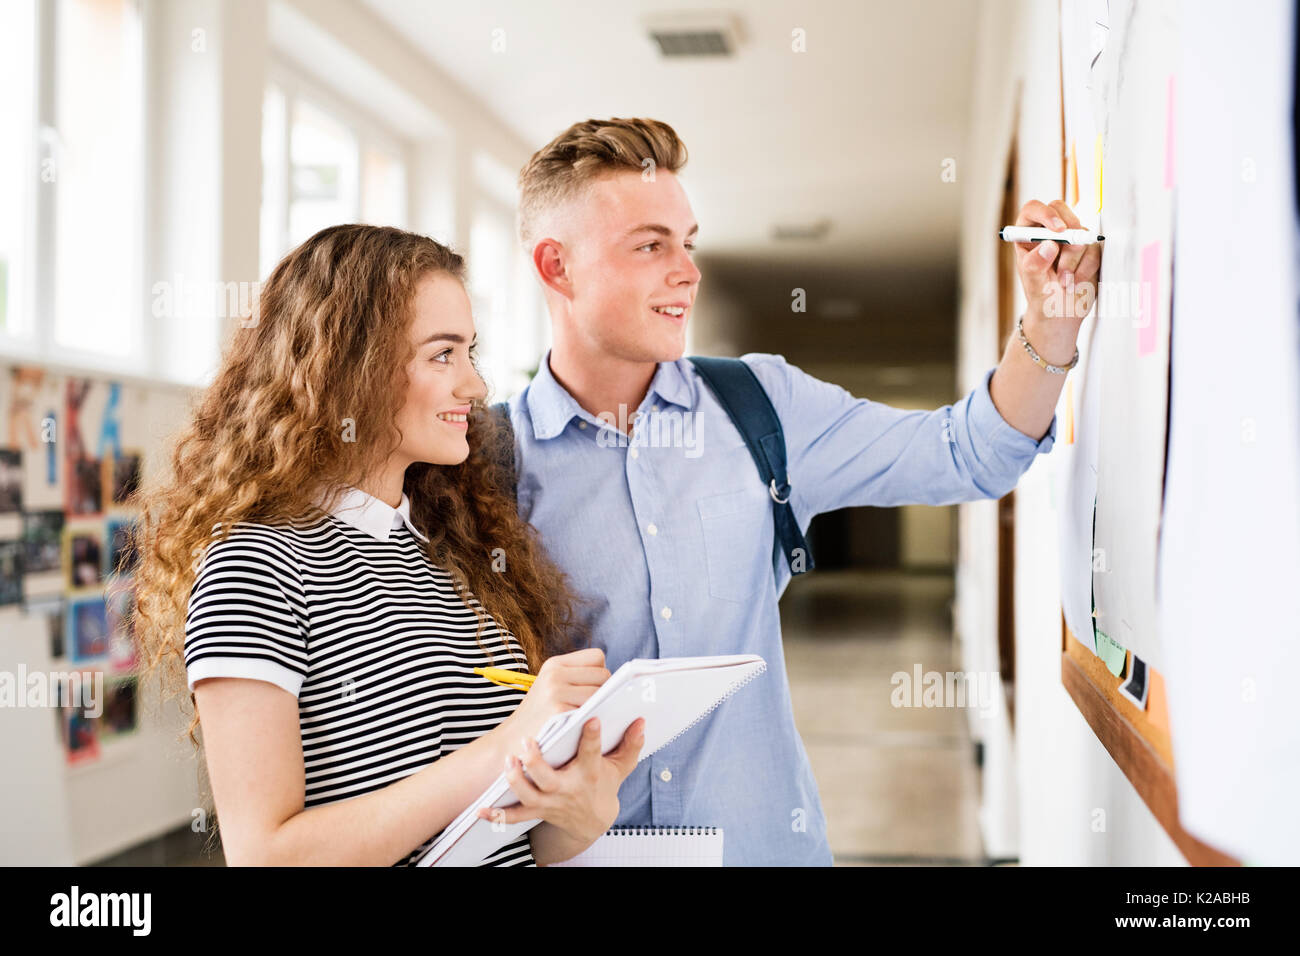 Attractive teenage student couple in high school hall. Stock Photo